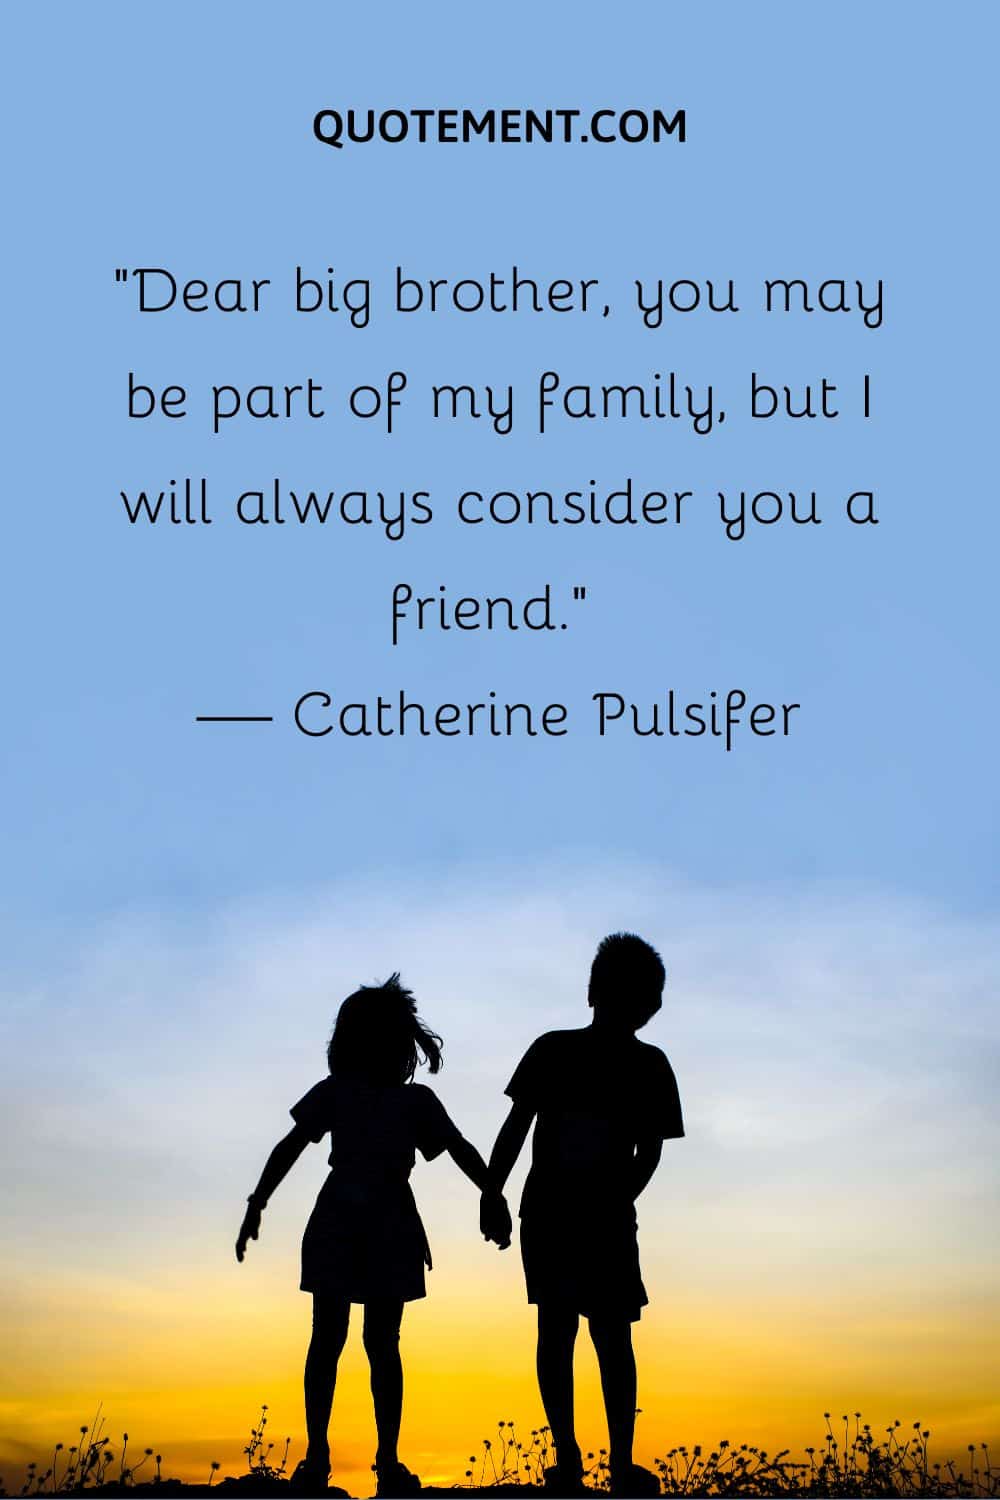 “Dear big brother, you may be part of my family, but I will always consider you a friend.” — Catherine Pulsifer